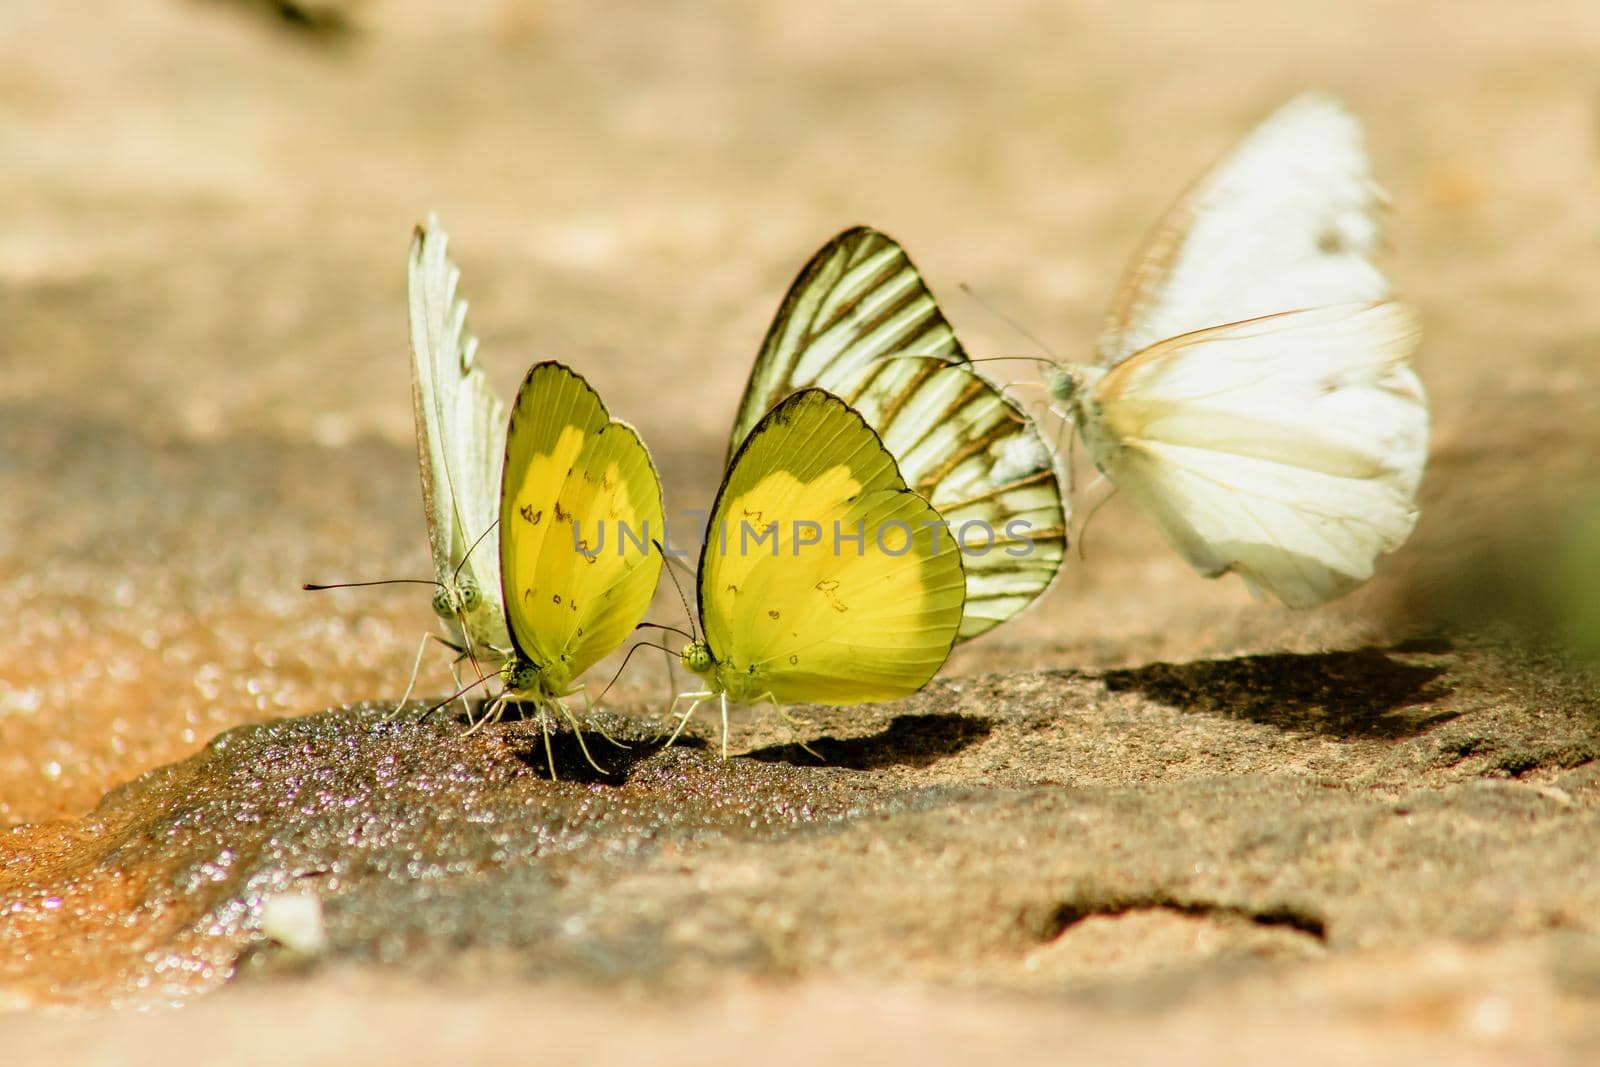 Eurema simulatrix sarinoides, a yellow nymph in the family Pieridae, with yellow wings.

